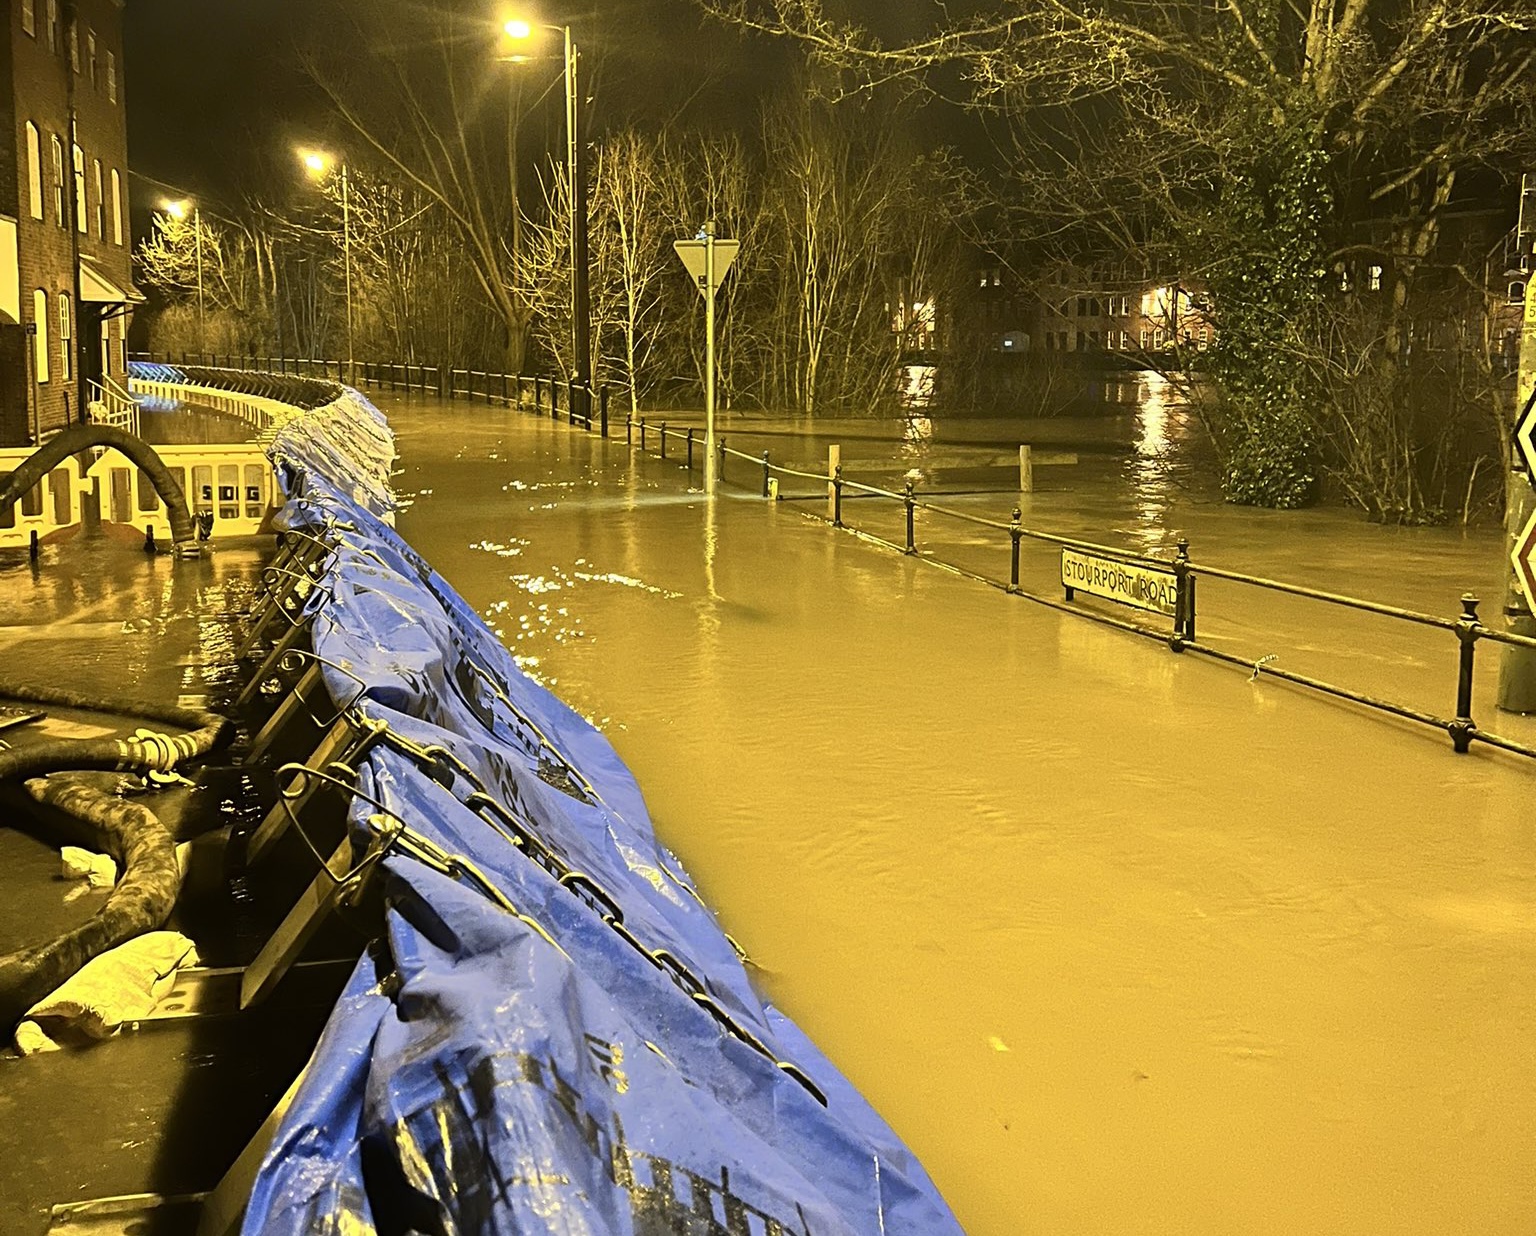 NEWS | Severe flood warning issued on the River Severn at Bewdley with concerns water levels could over-top defences